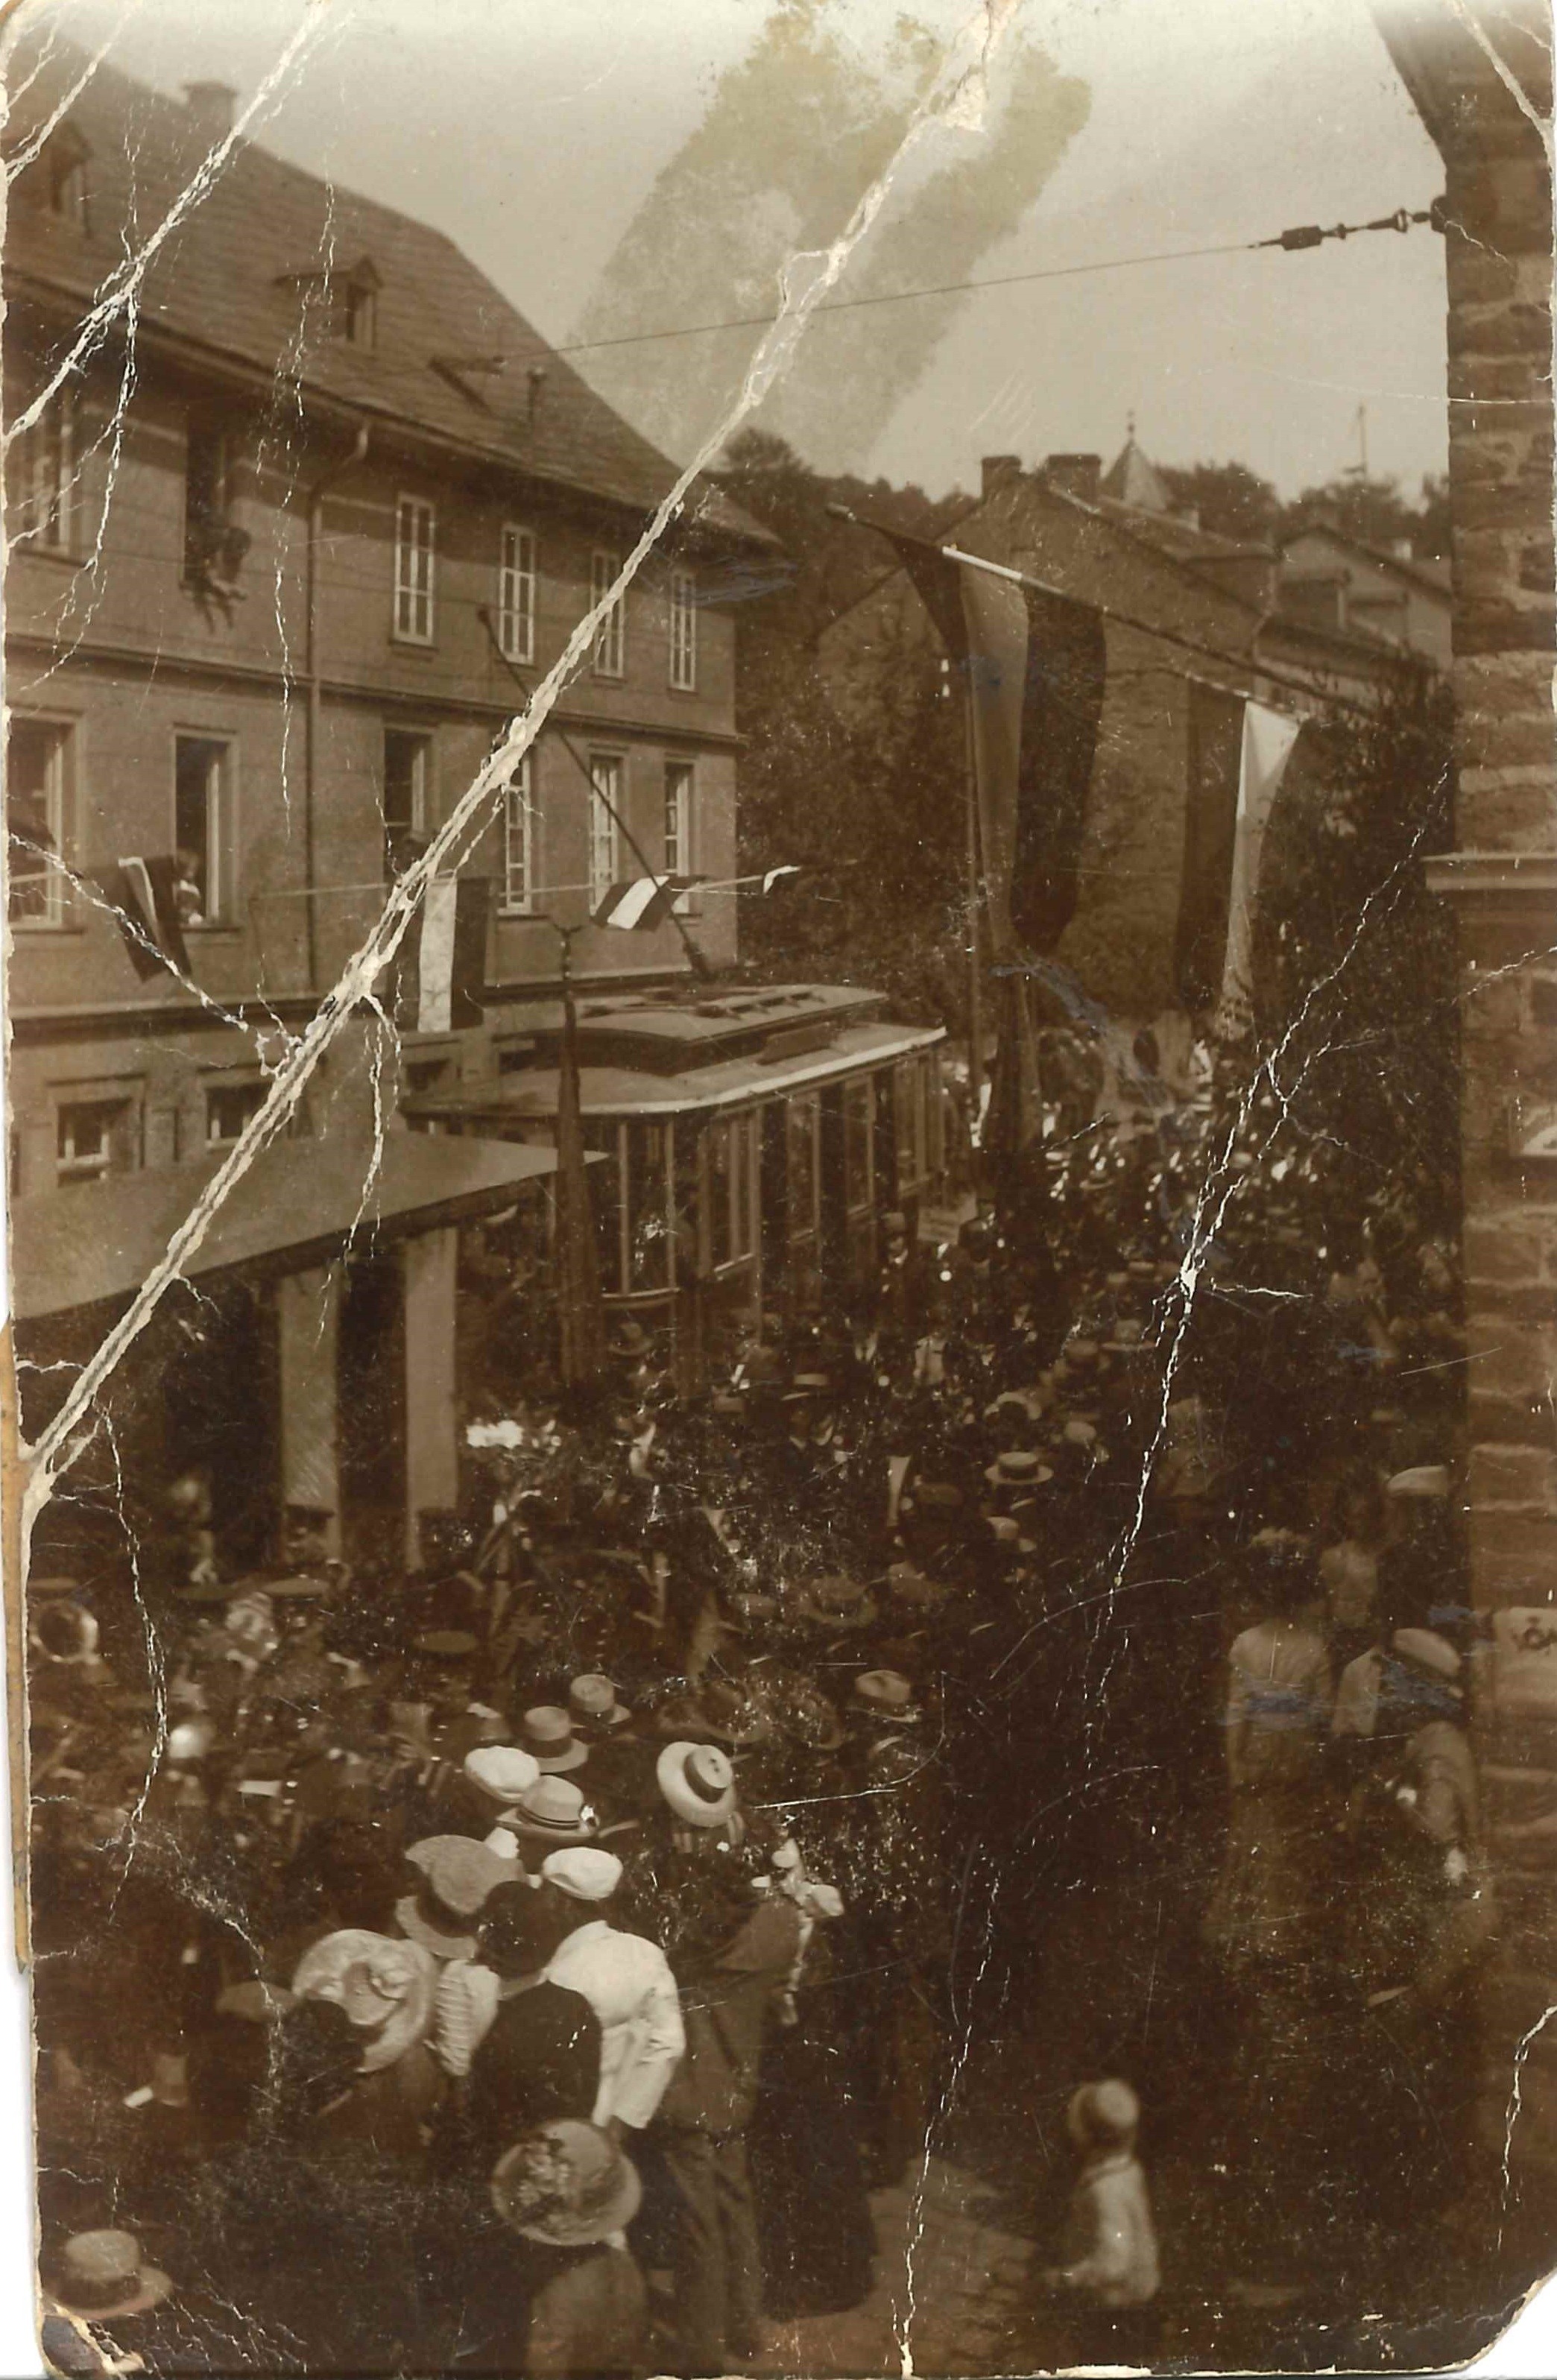 Gauturnfest in Bendorf, 1911 (REM CC BY-NC-SA)